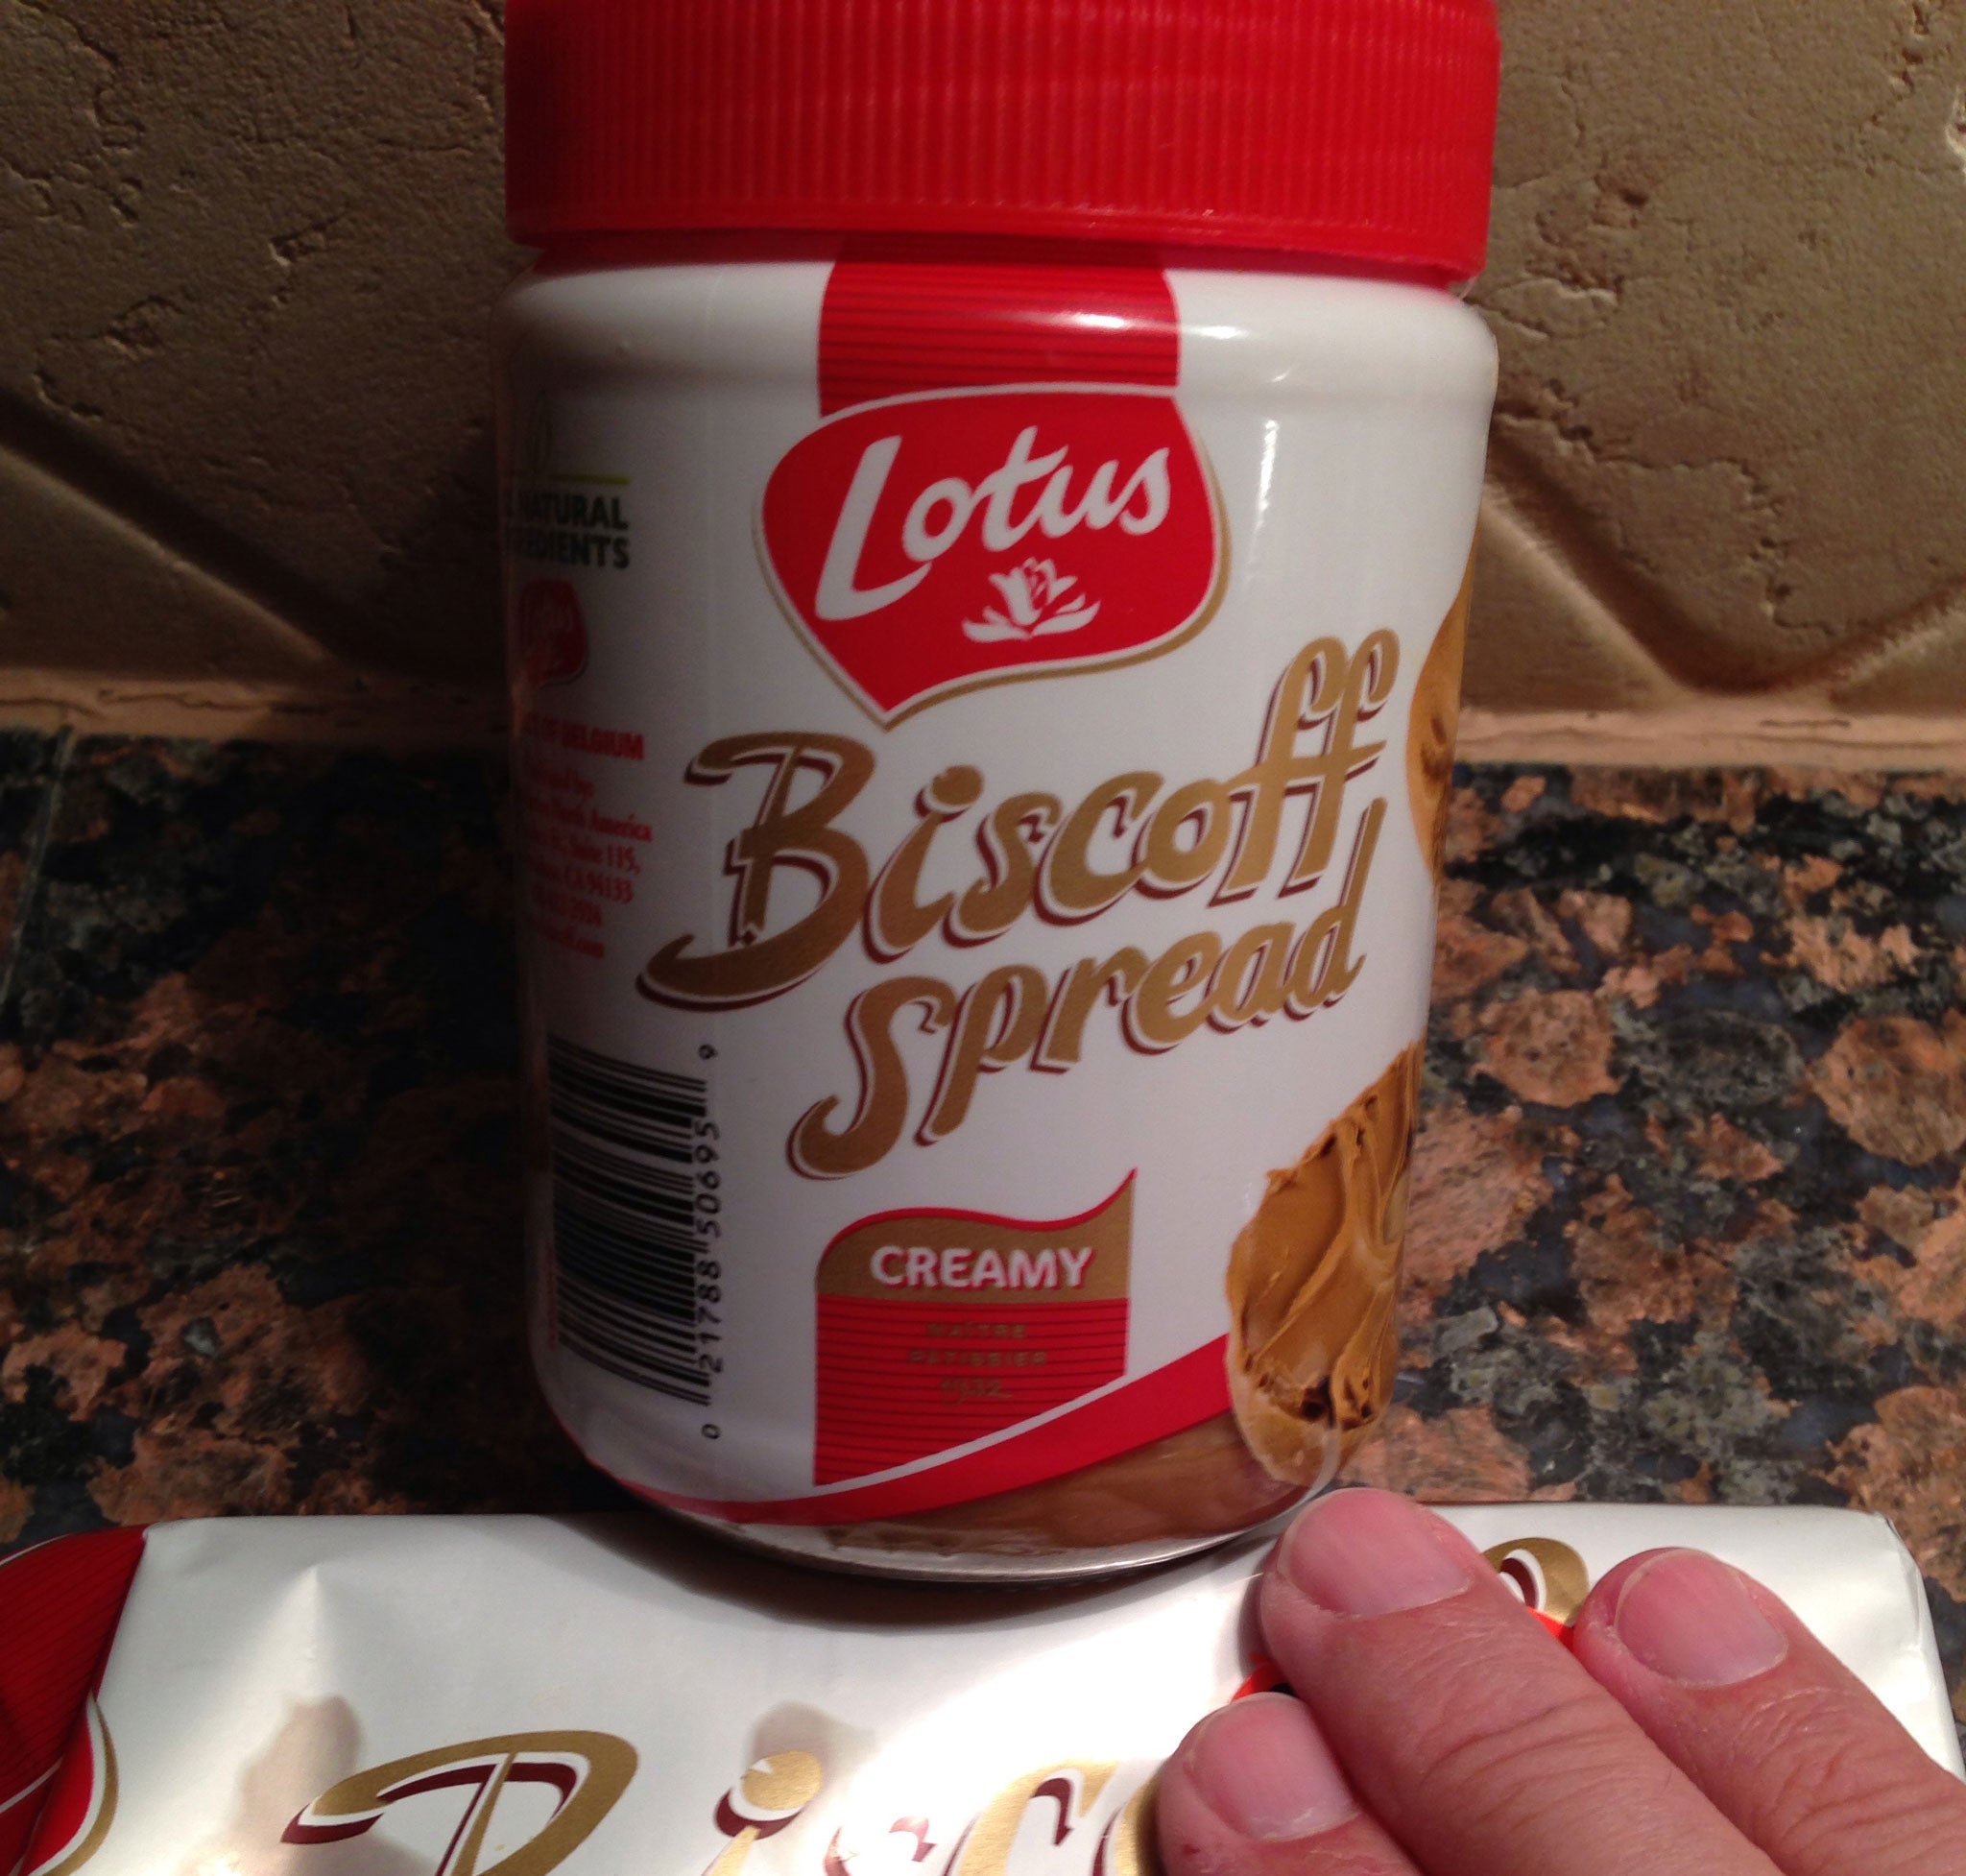 Biscoff Spread is made by Belgian company Lotus Bakeries